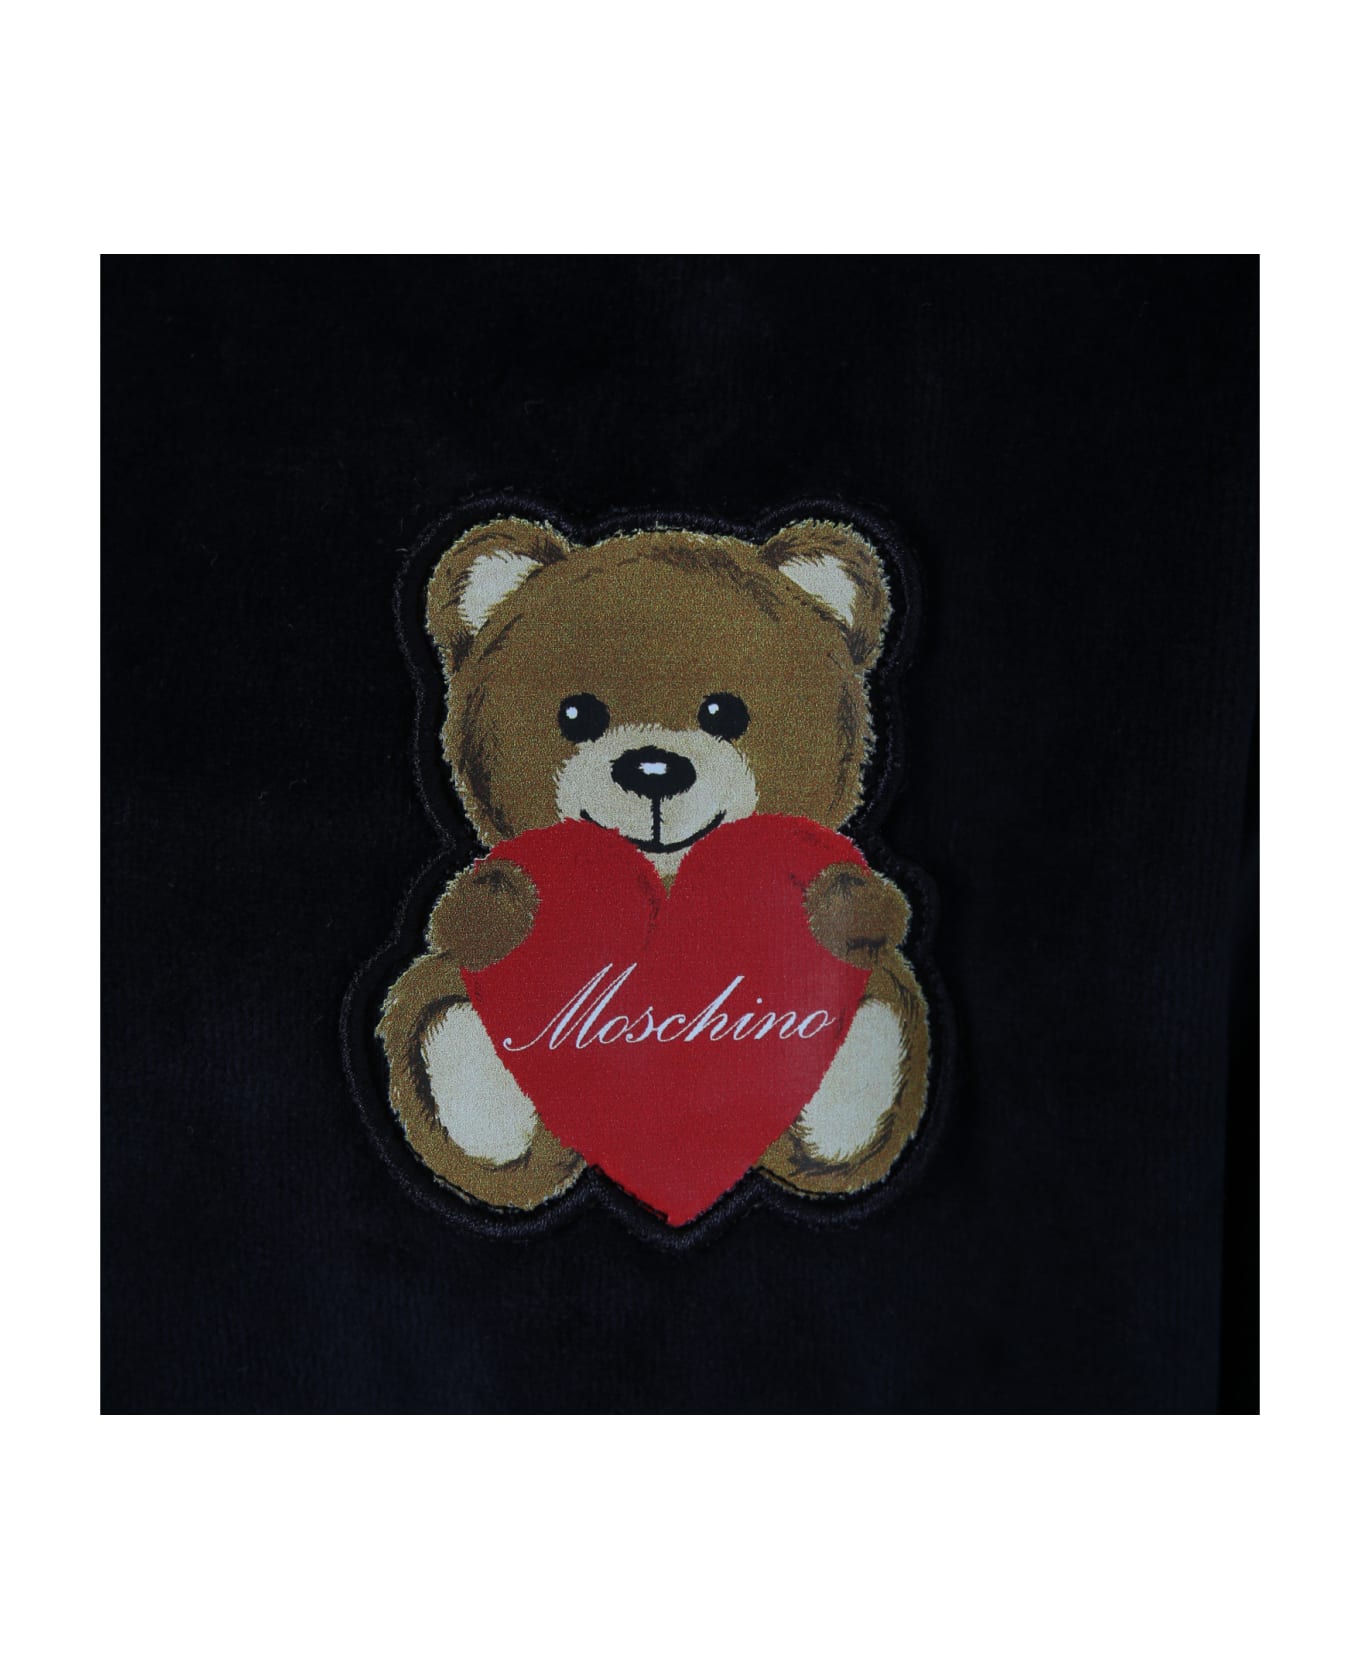 Moschino Black Suit For Girls With Teddy Bears And Logo - Black